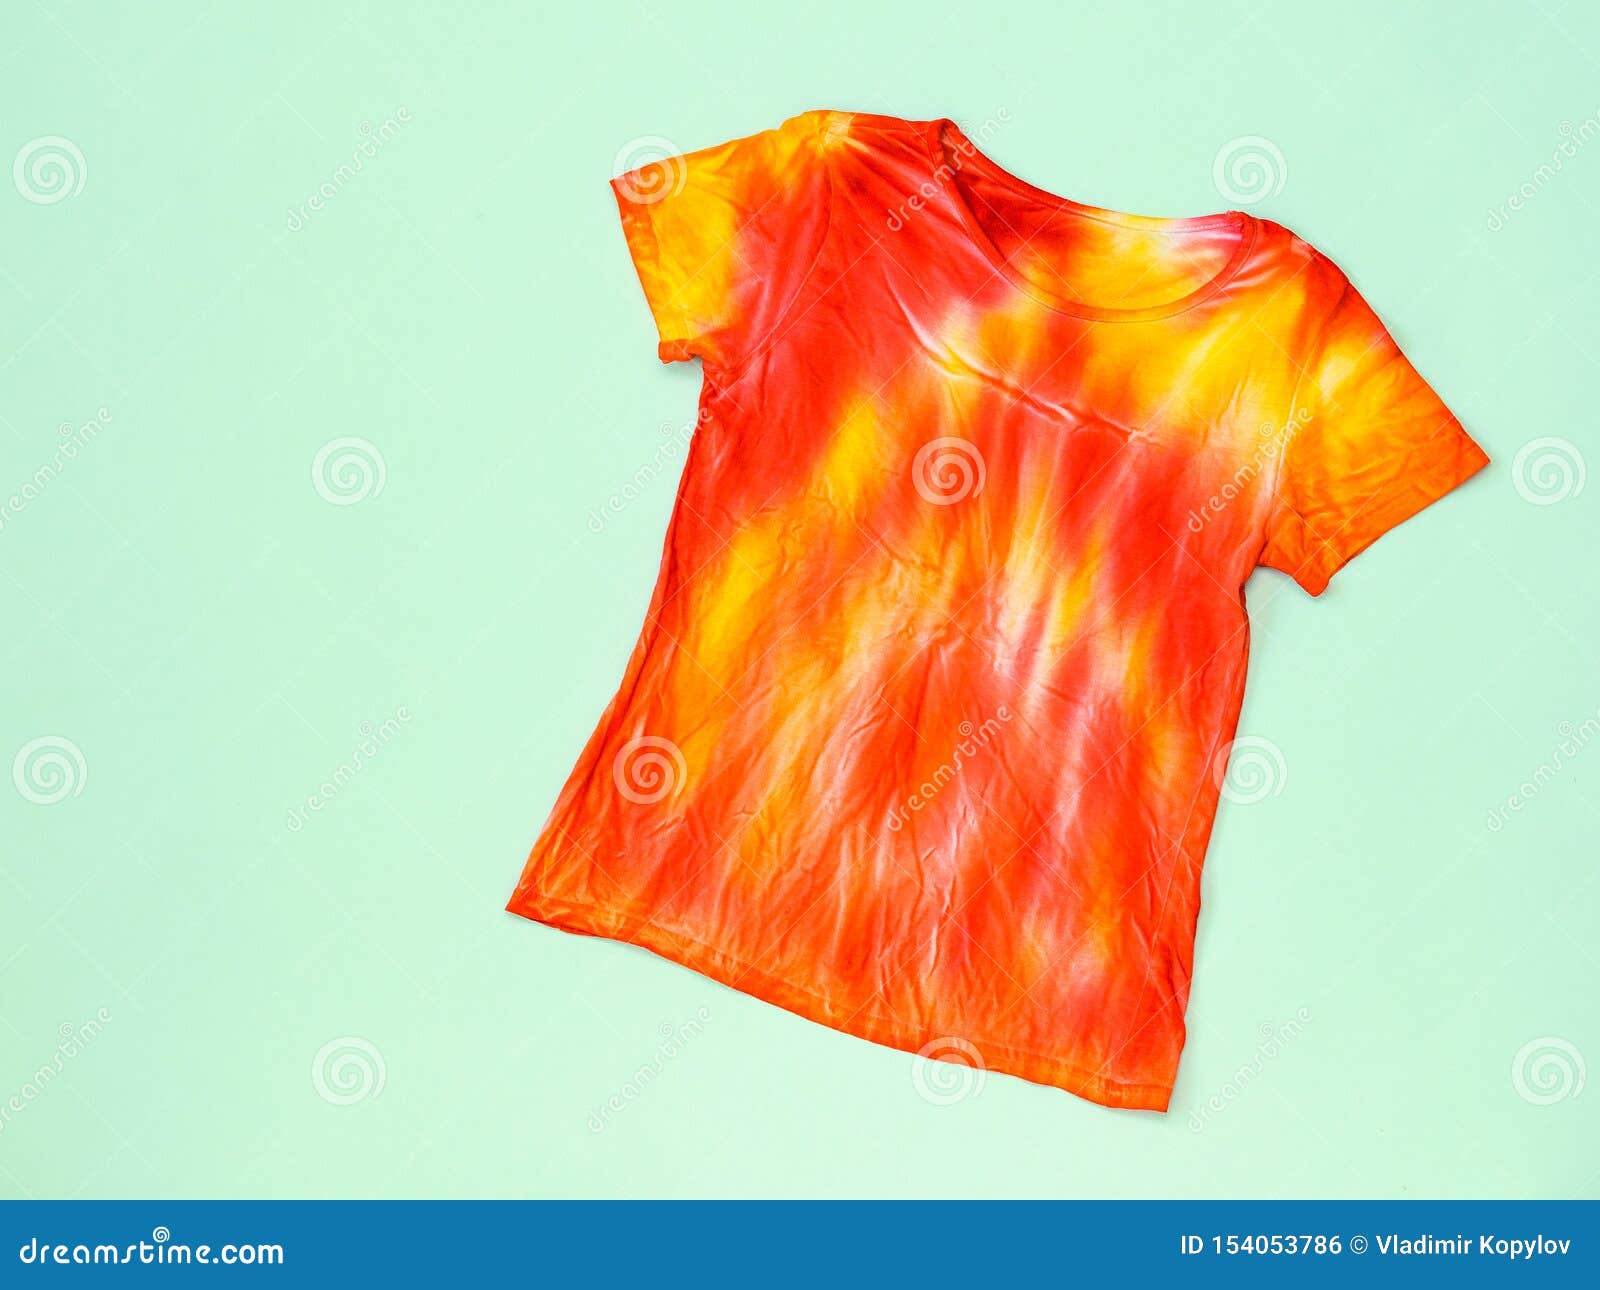 yellow and red tie dye shirt